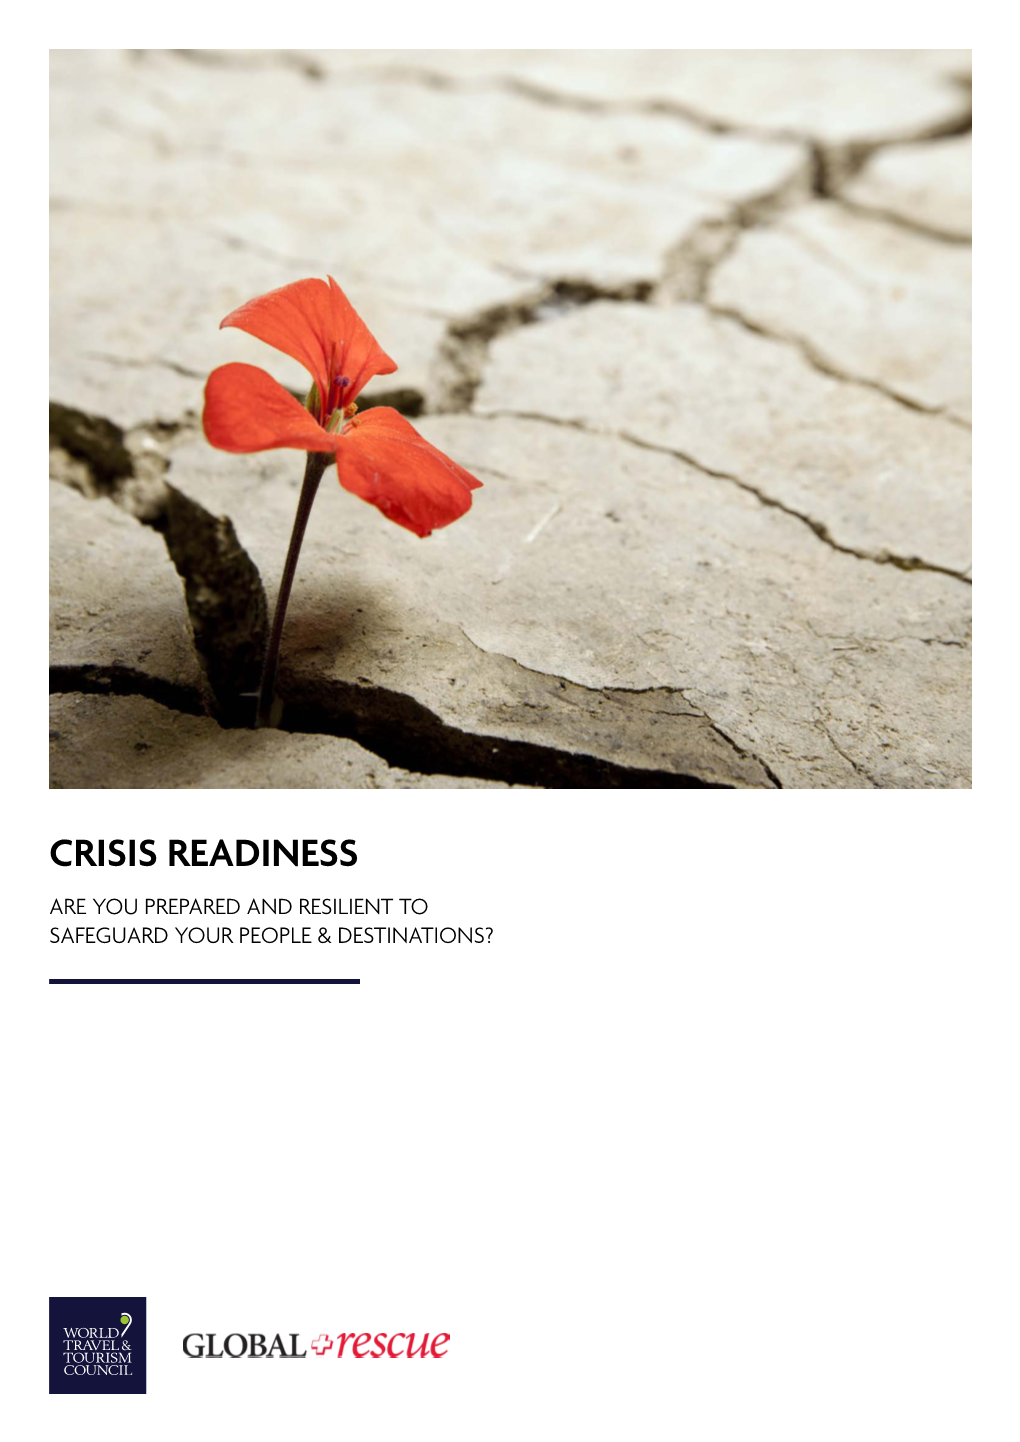 Research on Crisis Readiness